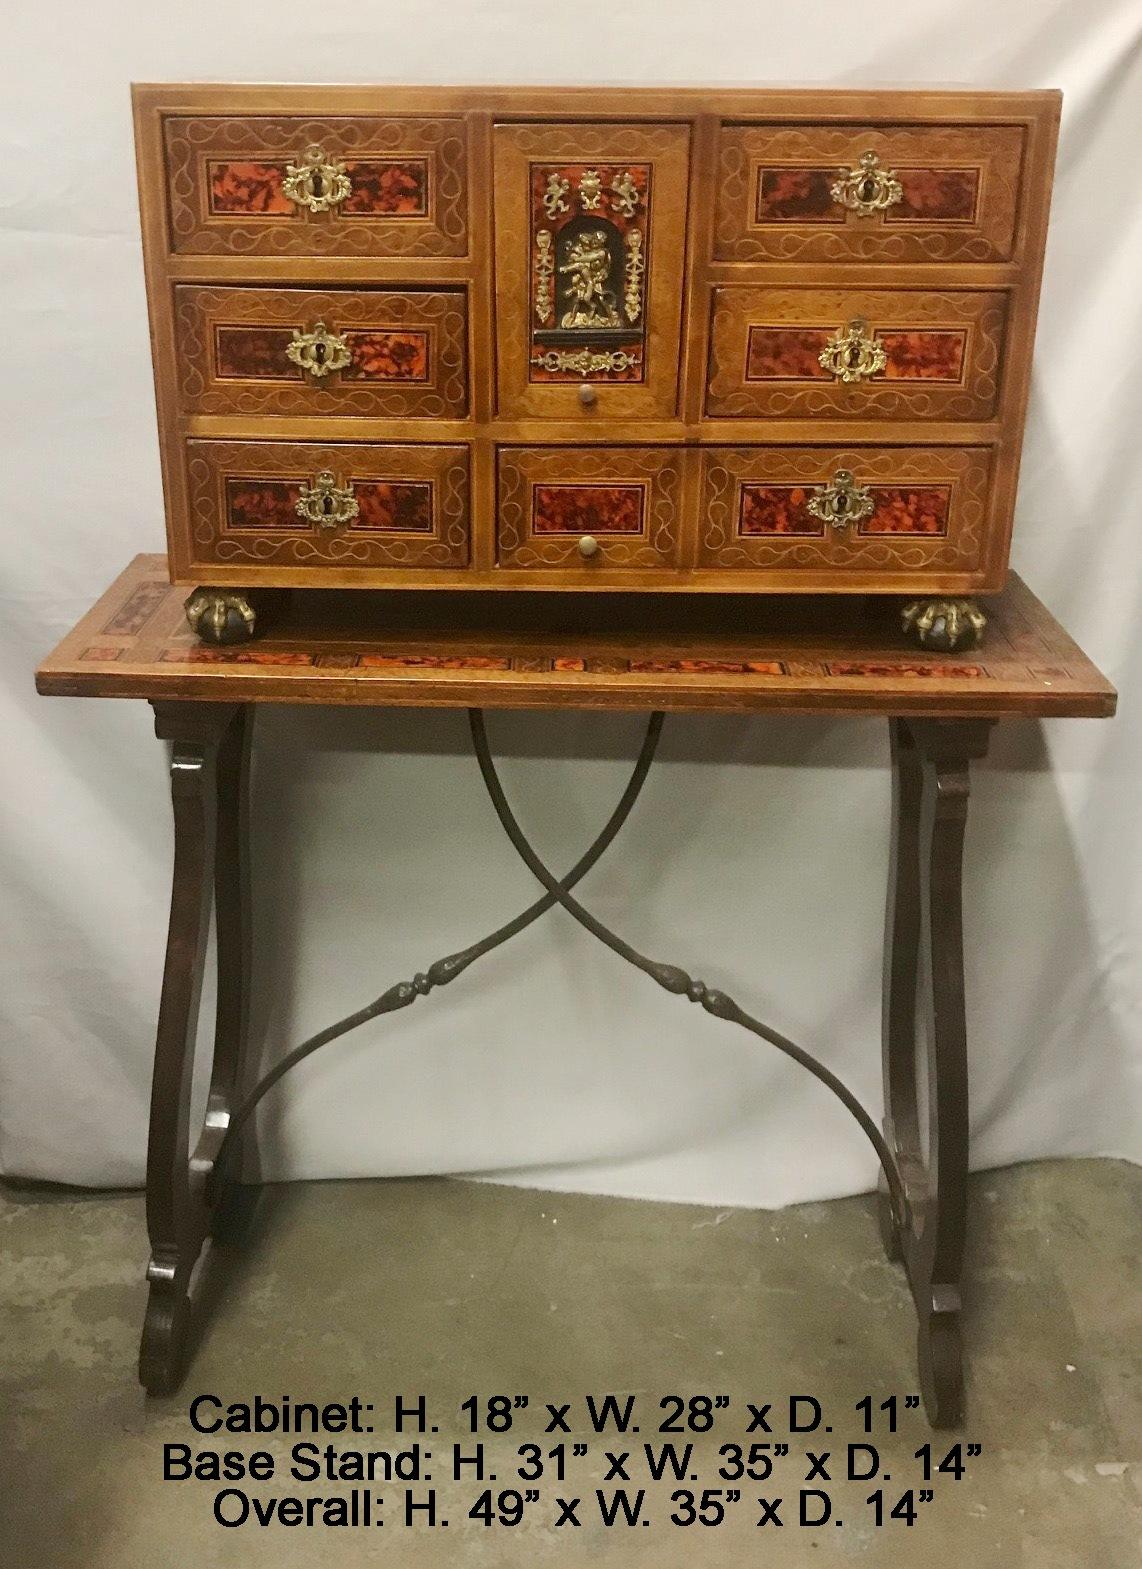 Remarkable 18th century Spanish baroque tortoise shell inlaid and brass mounted walnut cabinet on 19th century inlaid stand.
The cabinet centered with a compartment with bronze figure mounted door, flanked by three drawer each side and small drawer